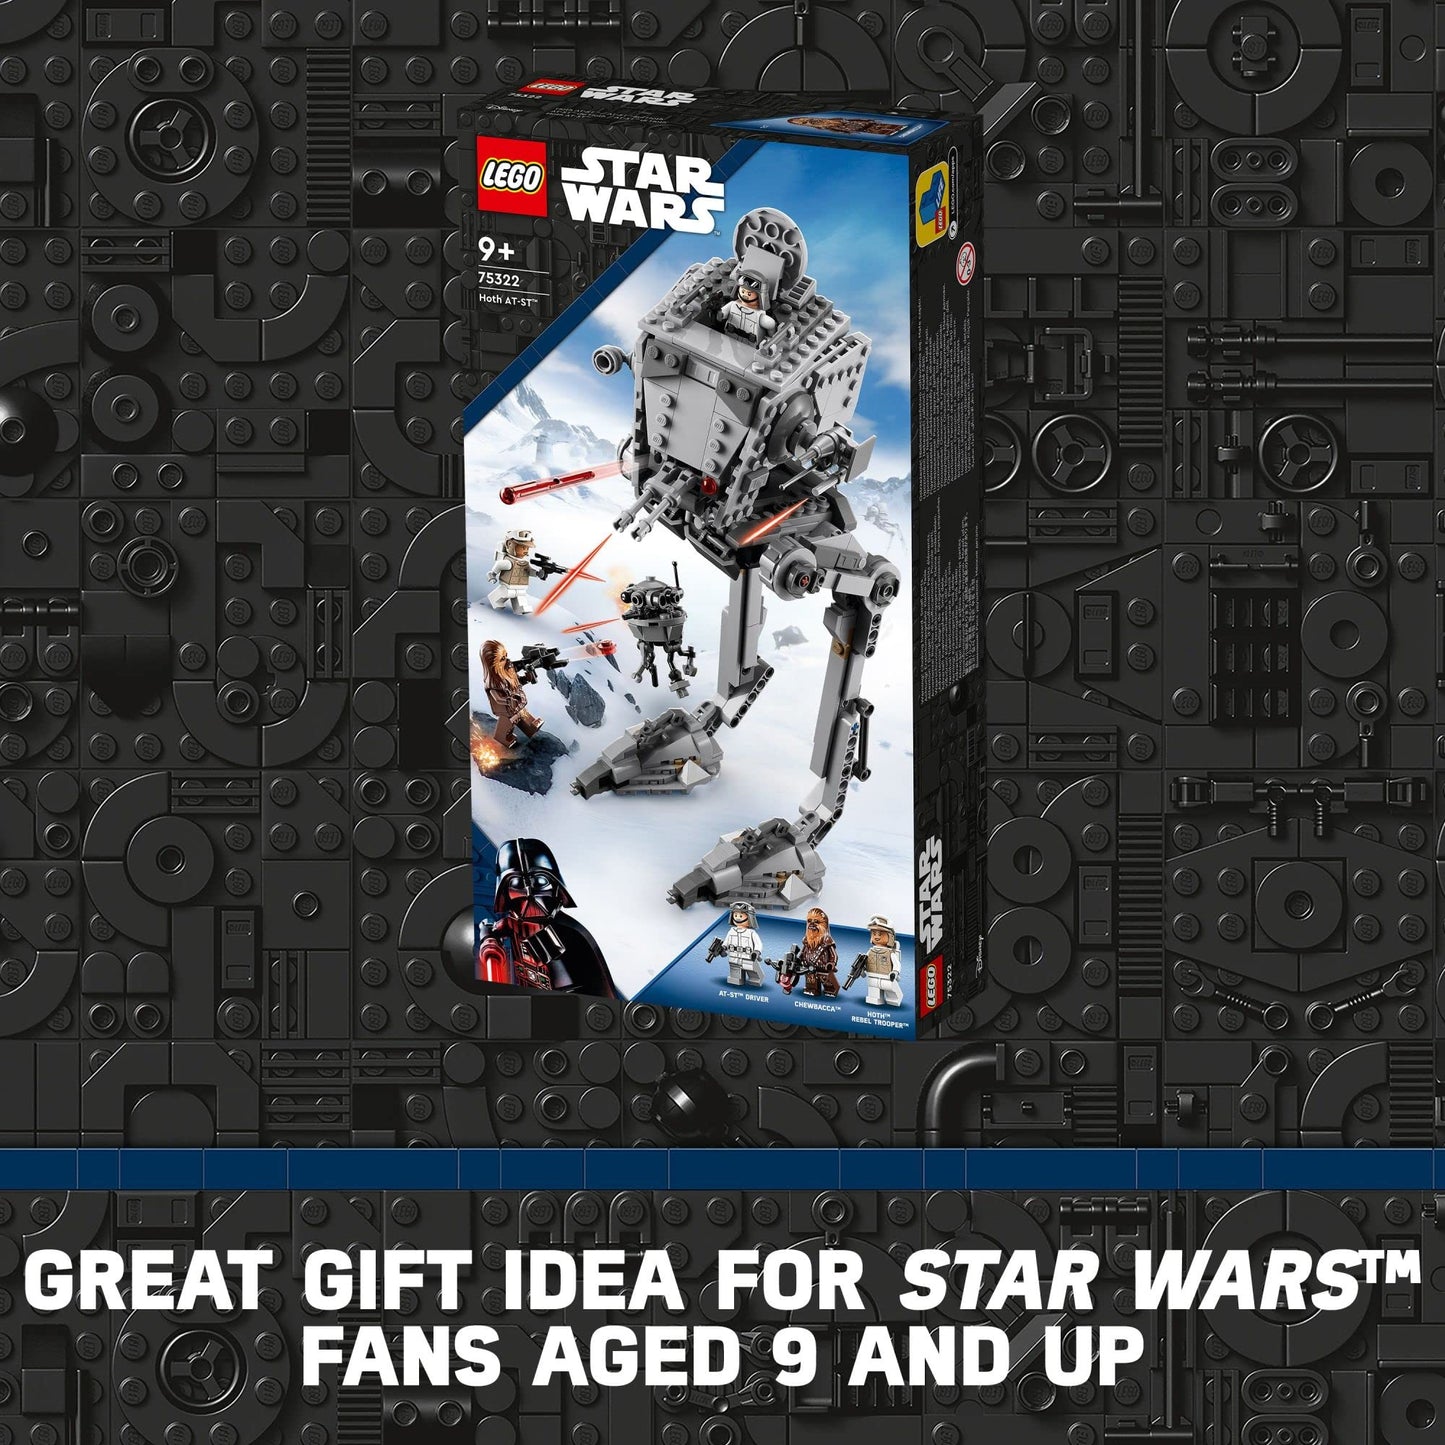 LEGO Star Wars Hoth at-ST Walker 75322 Building Toy for Kids with Chewbacca Minifigure and Droid Figure, The Empire Strikes Back Model